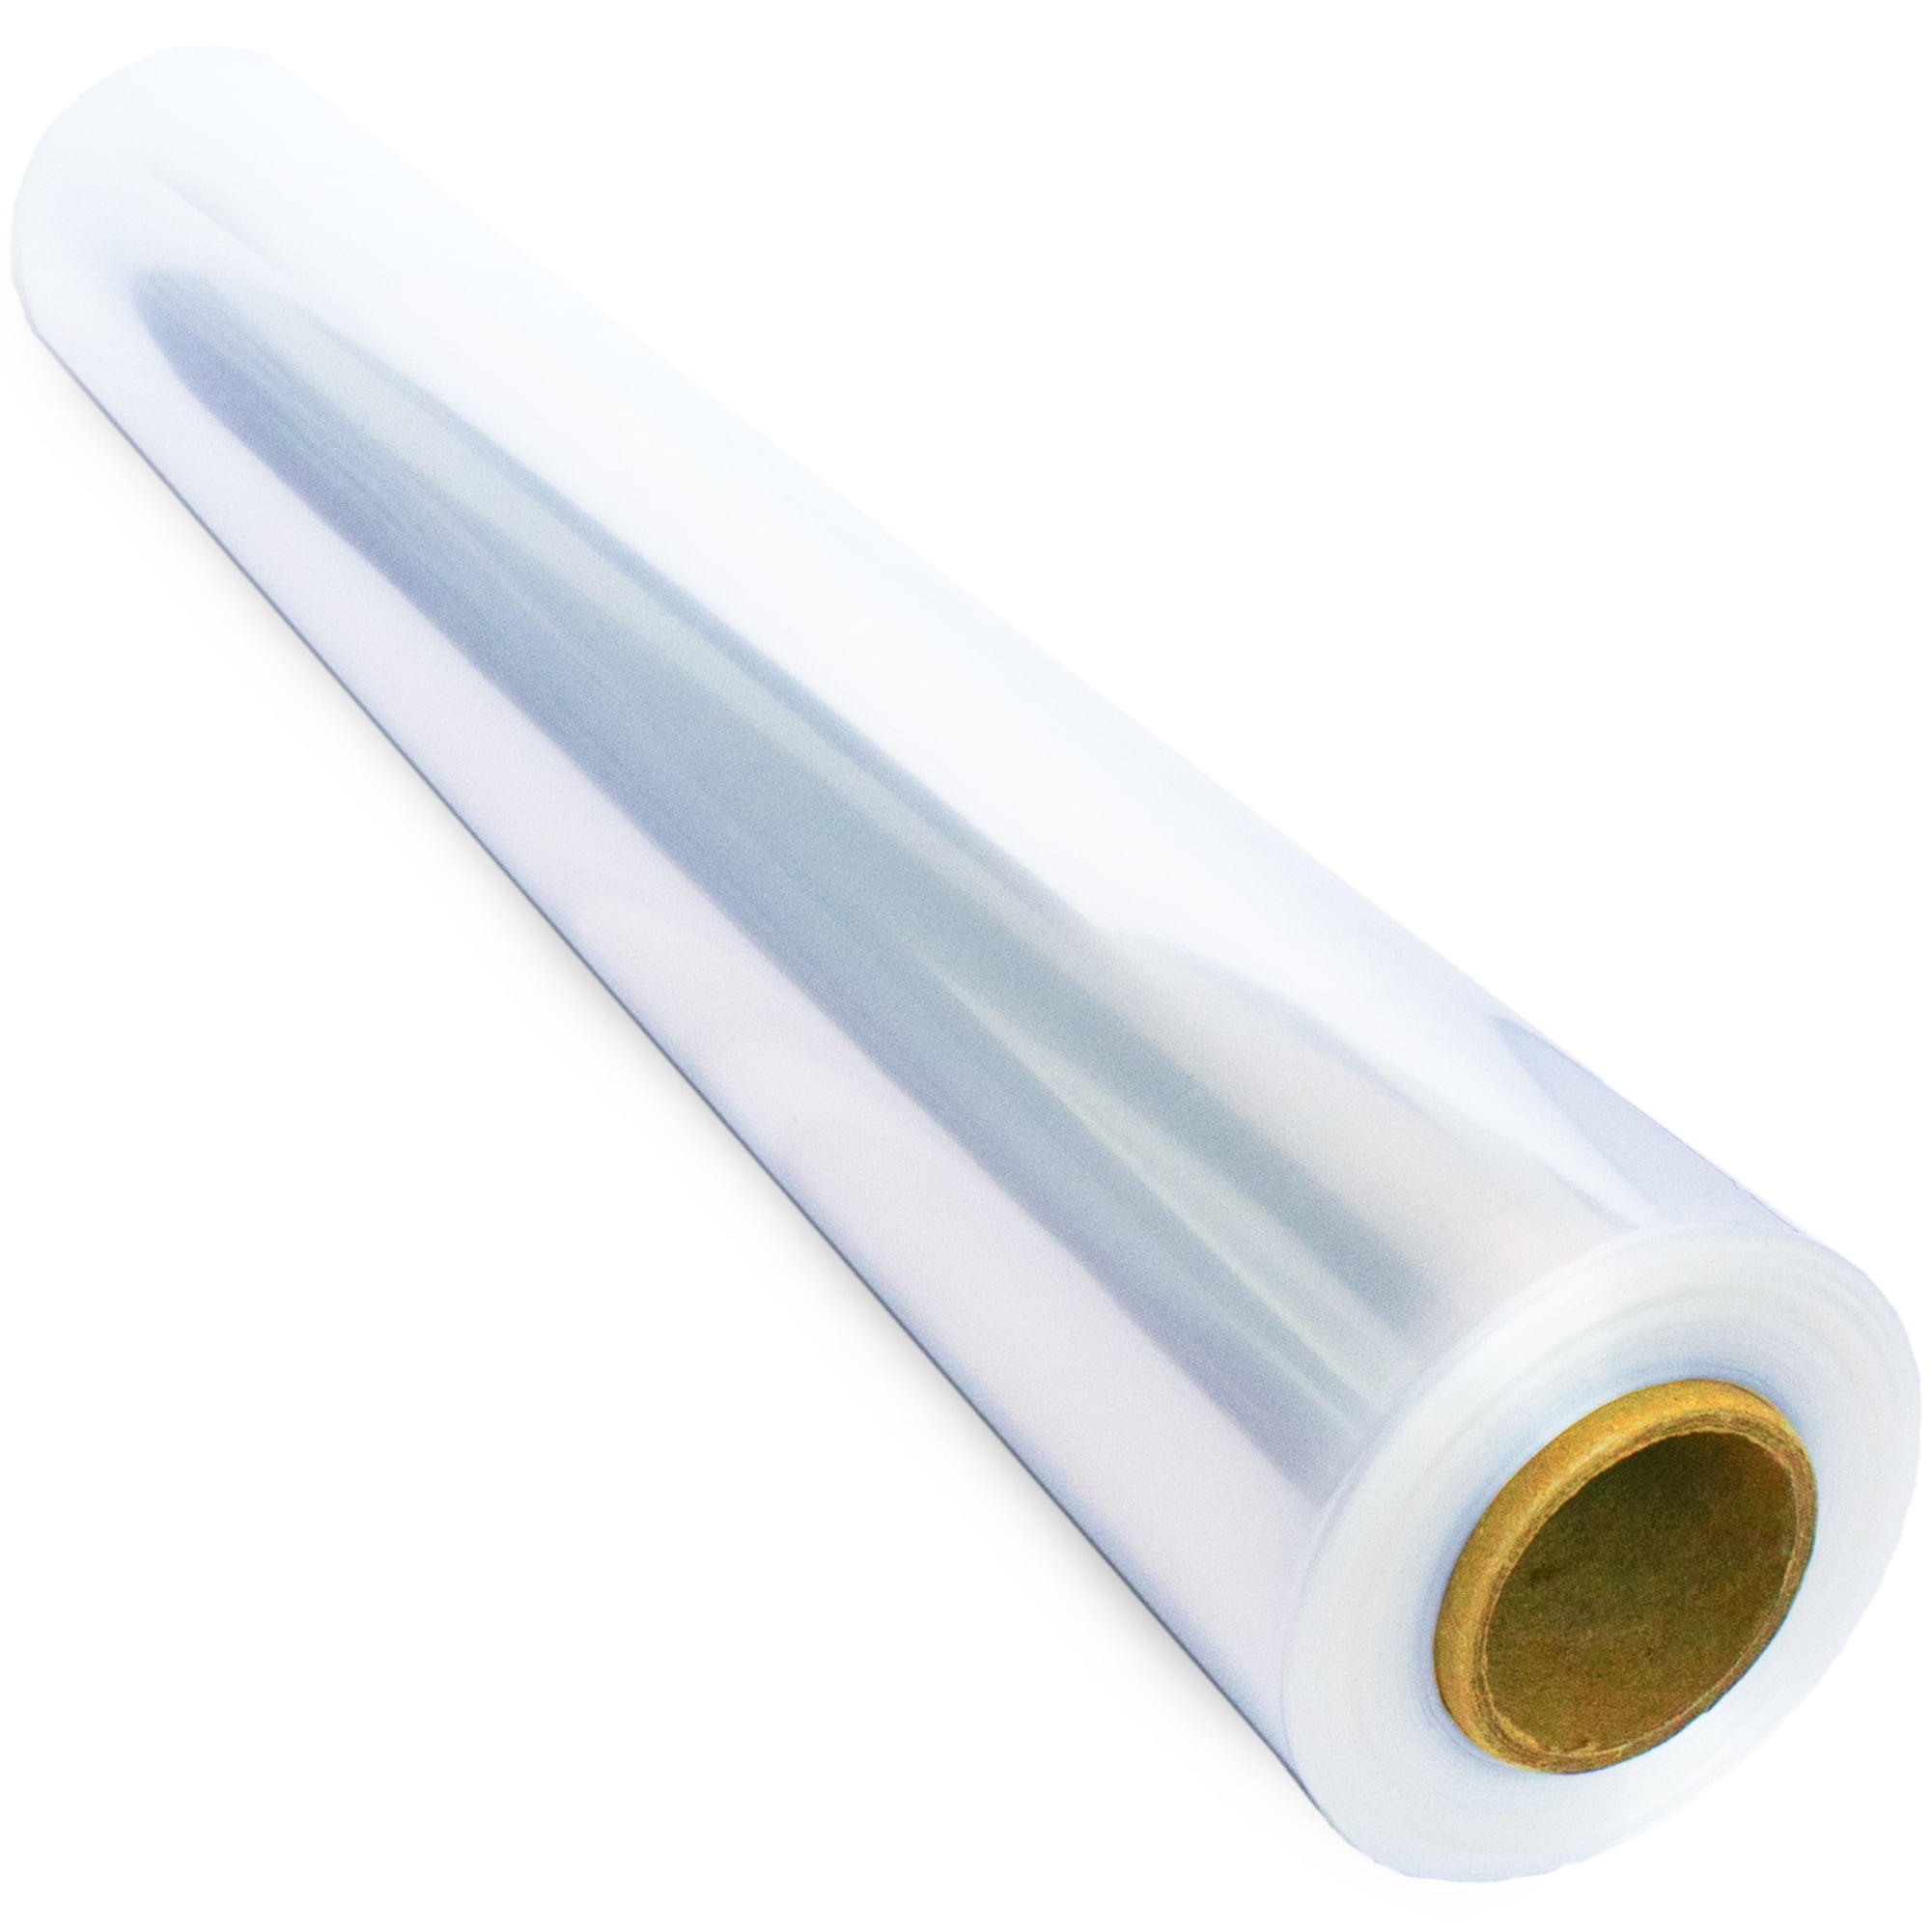 - 3 Mil Thicken Cellophane Roll Clear Cellophane Bags Large Clear Wrapping Paper for Flower Gift Baskets Wrap 31.5 in x 100 ft 100 ft Clear Cellophane Wrap Roll 